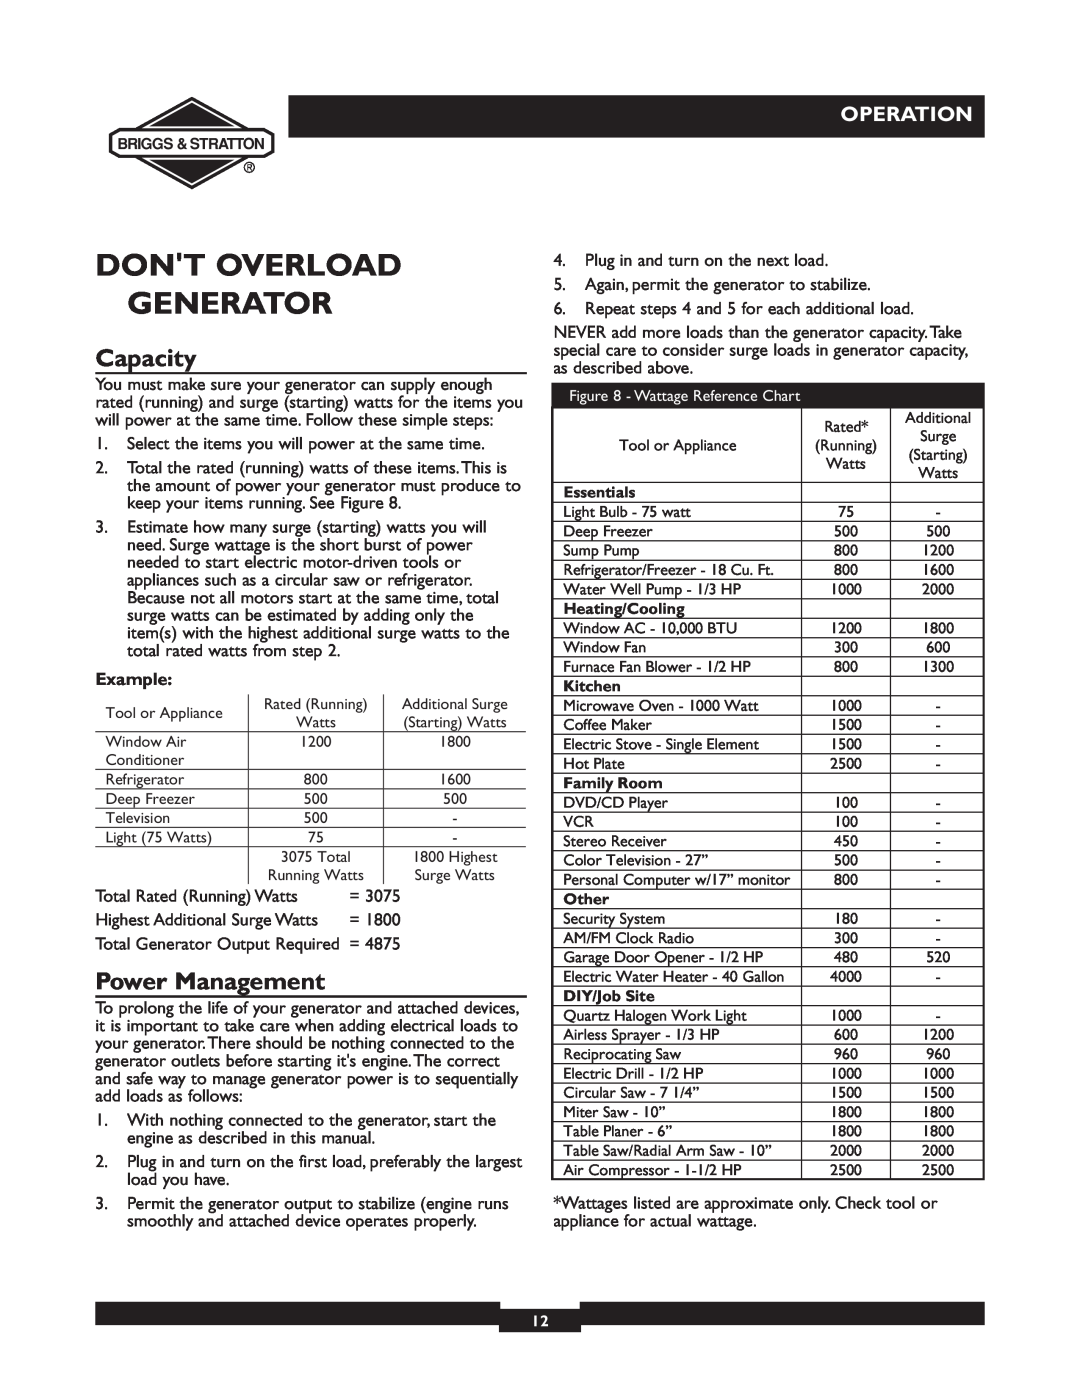 Briggs & Stratton 30238 owner manual Dont Overload Generator, Capacity, Power Management, Operation 